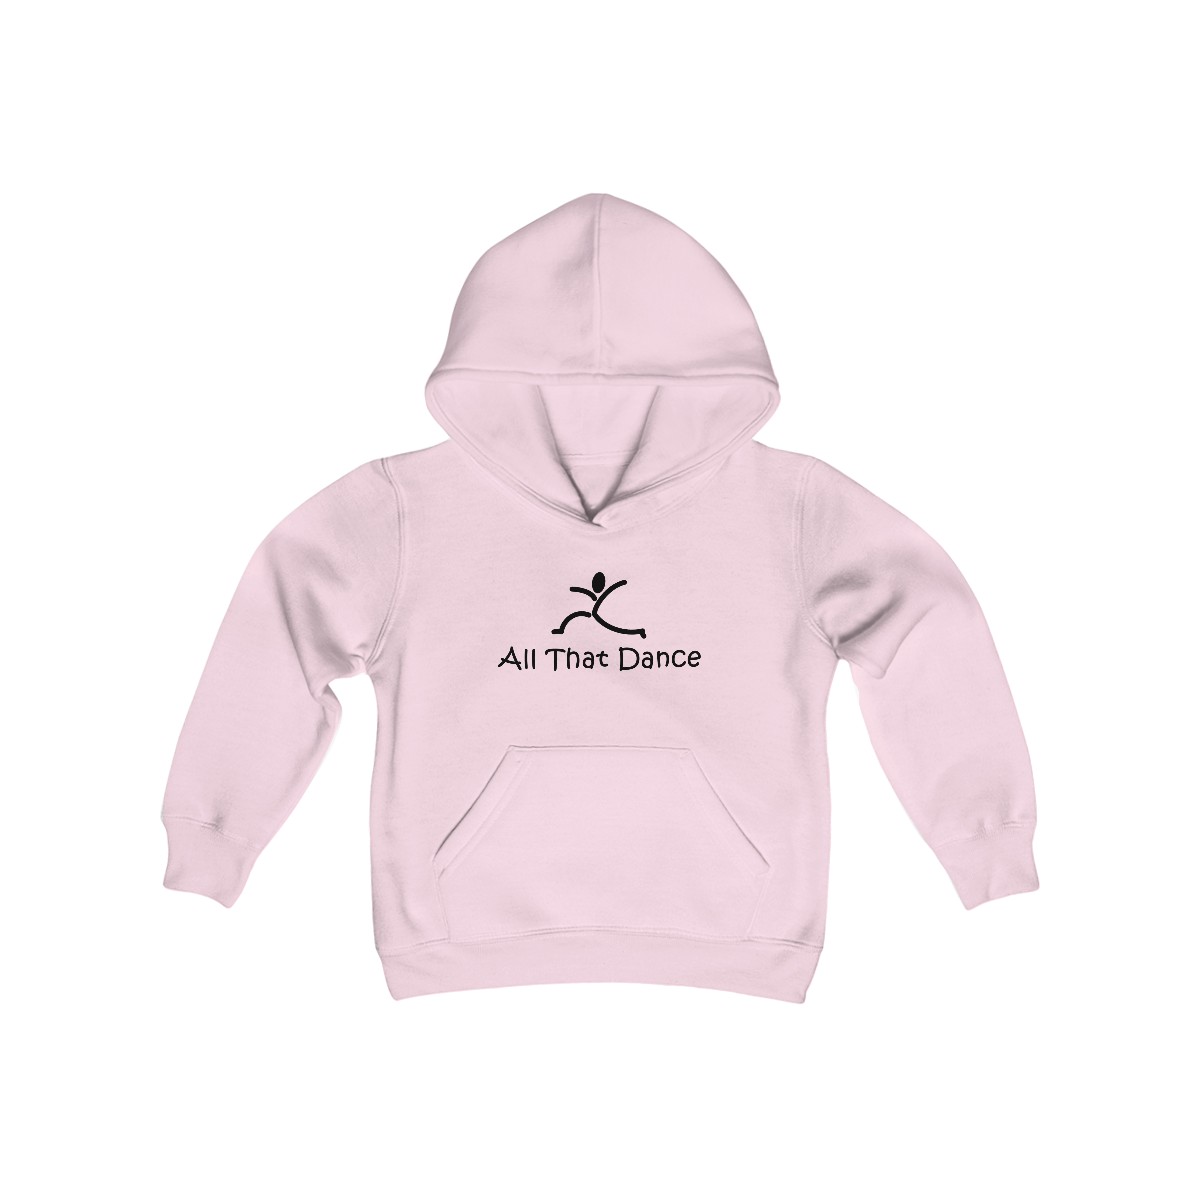 Youth Sizes - All That Dance Hoodies product thumbnail image